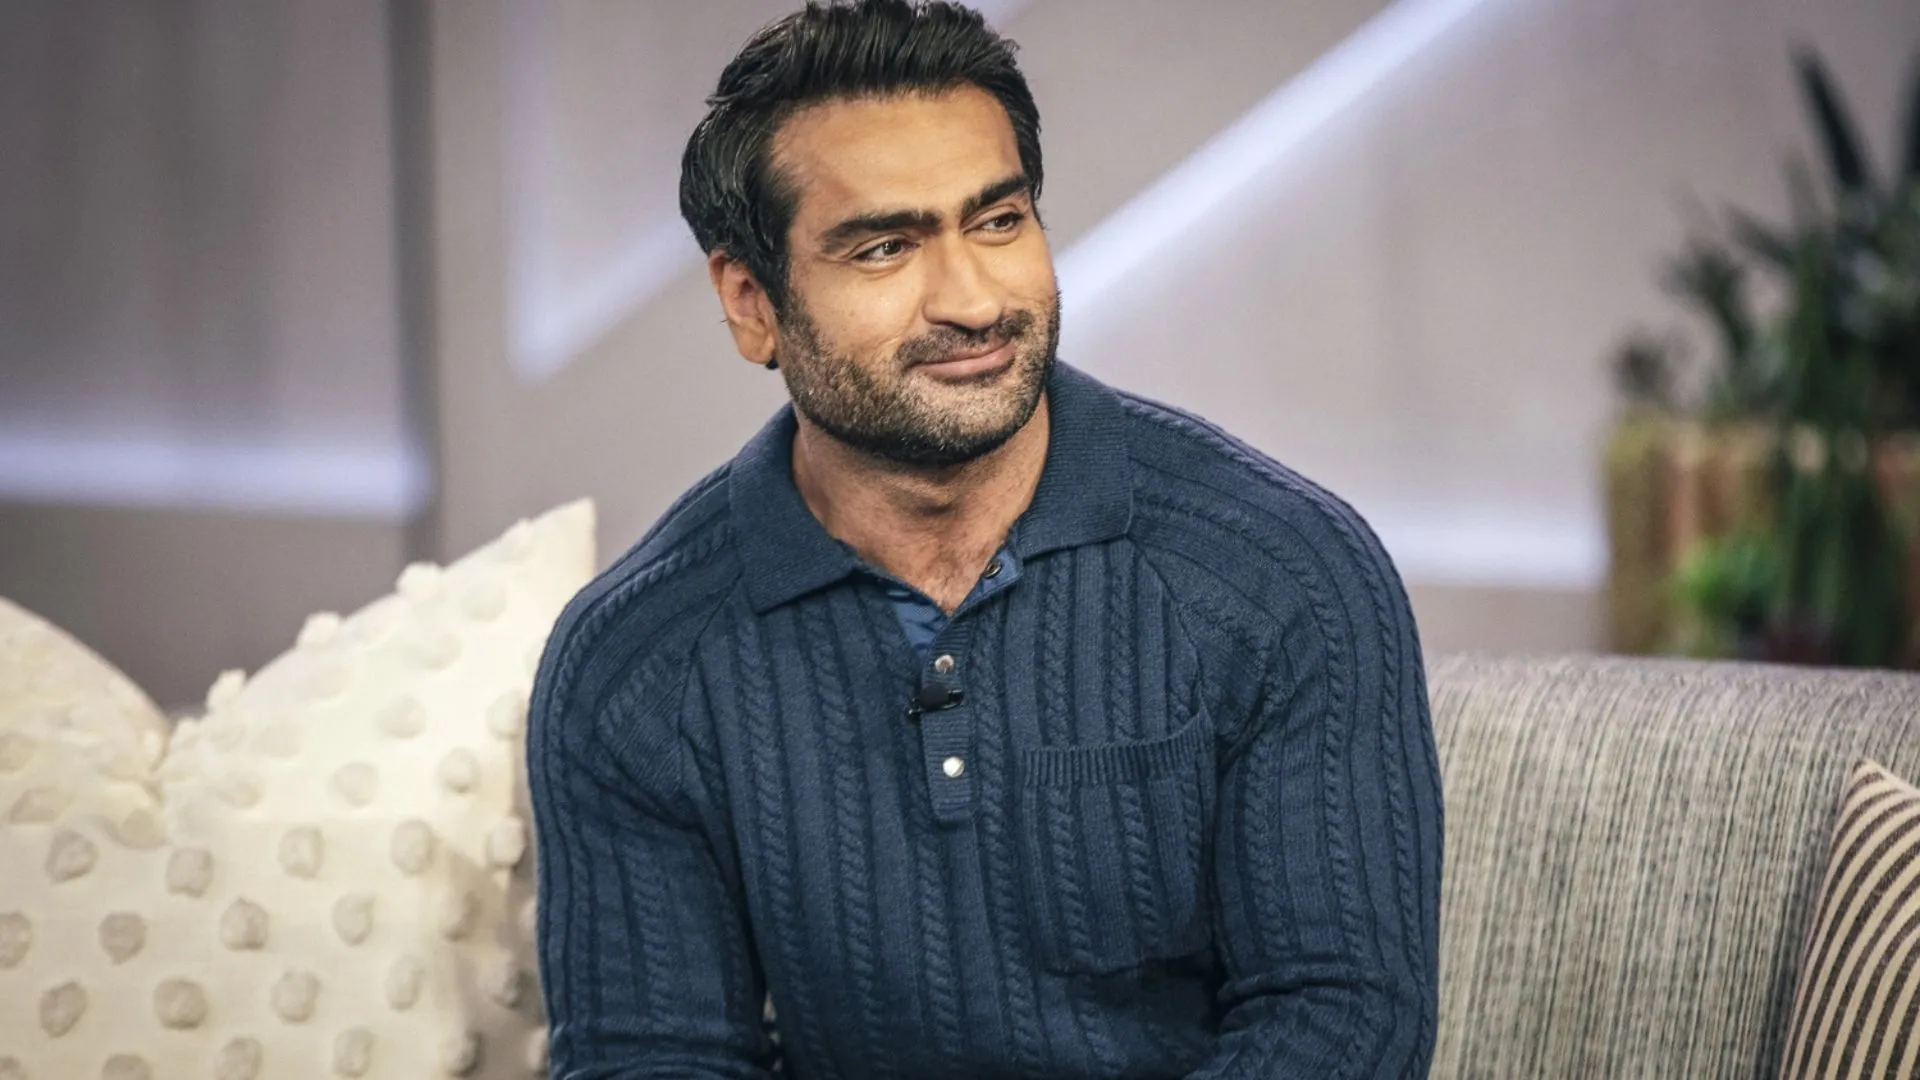 Kumail Nanjiani Joins Season 4 of 'Only Murders in the Building' in Mystery Role Filming Underway with Exciting New Additions